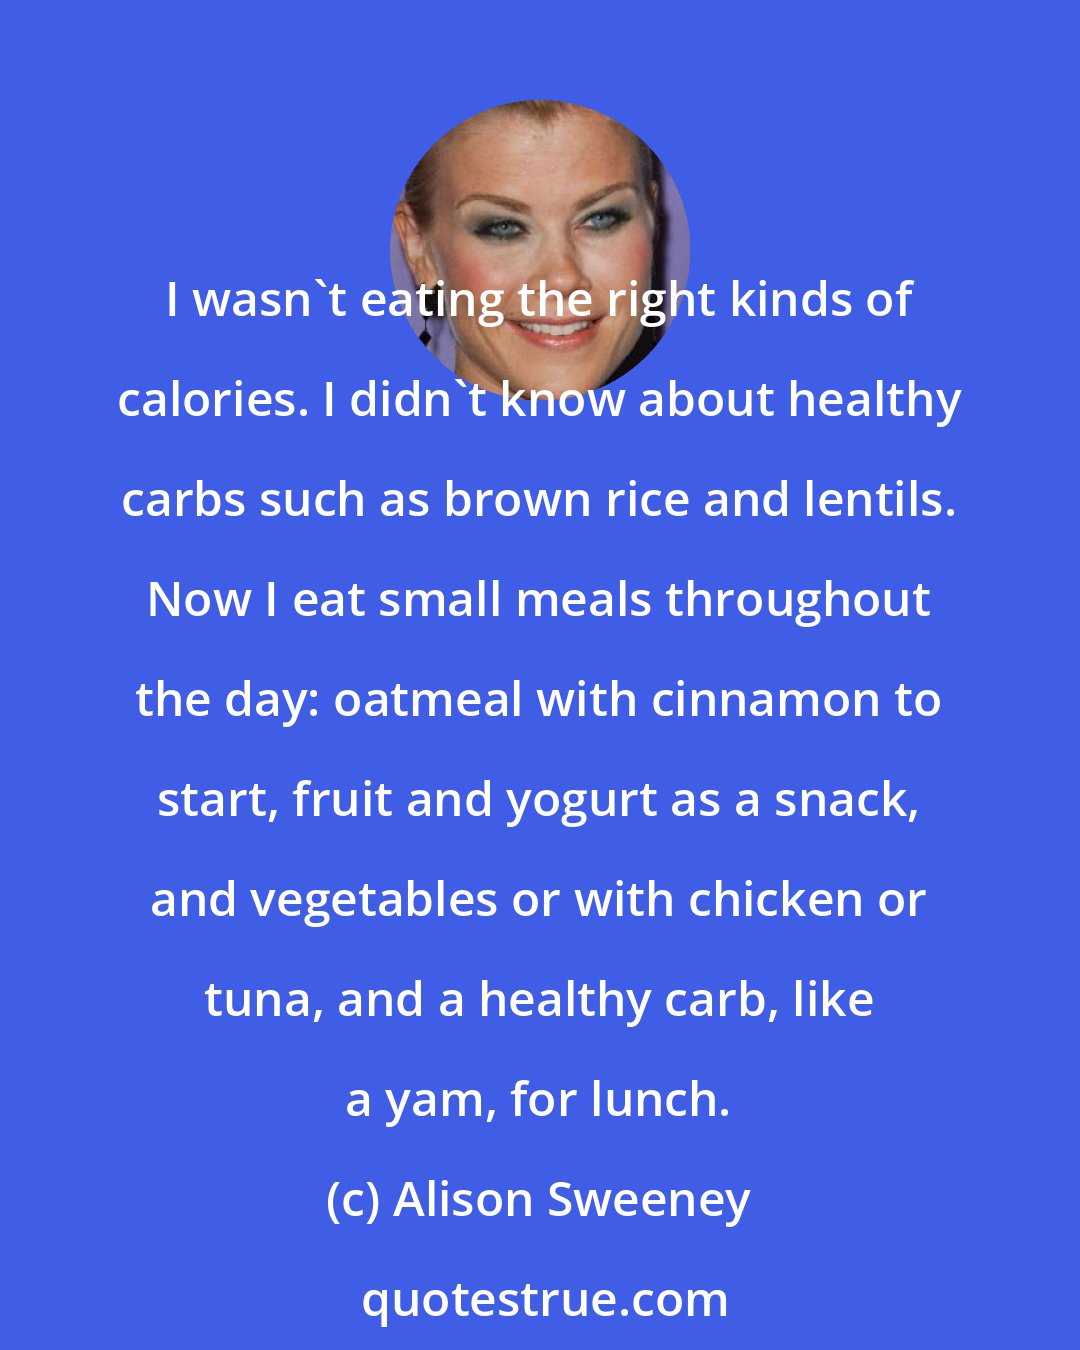 Alison Sweeney: I wasn't eating the right kinds of calories. I didn't know about healthy carbs such as brown rice and lentils. Now I eat small meals throughout the day: oatmeal with cinnamon to start, fruit and yogurt as a snack, and vegetables or with chicken or tuna, and a healthy carb, like a yam, for lunch.